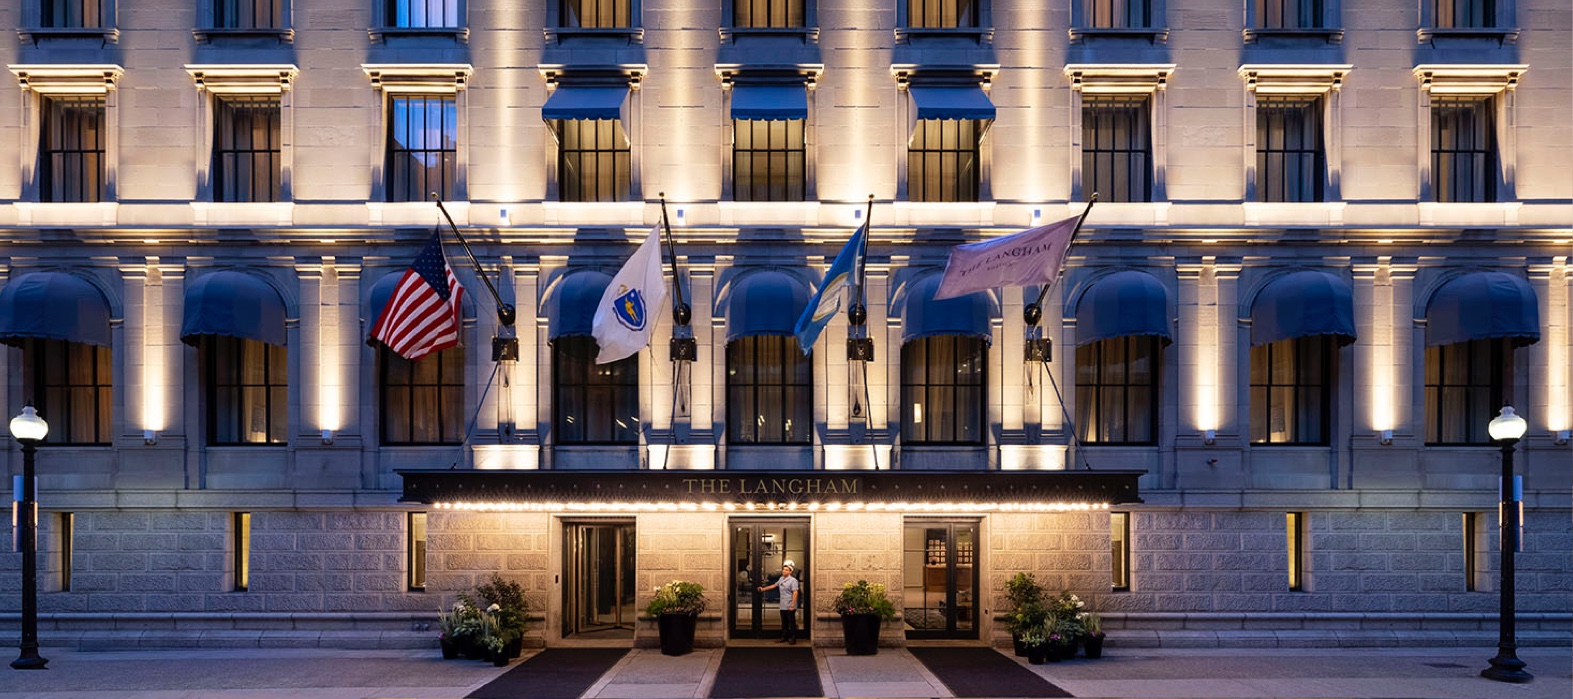 Accessible Facilities - The Langham. Boston is compliant with The 2010 Standards Of The Americans With Disabilities Act.